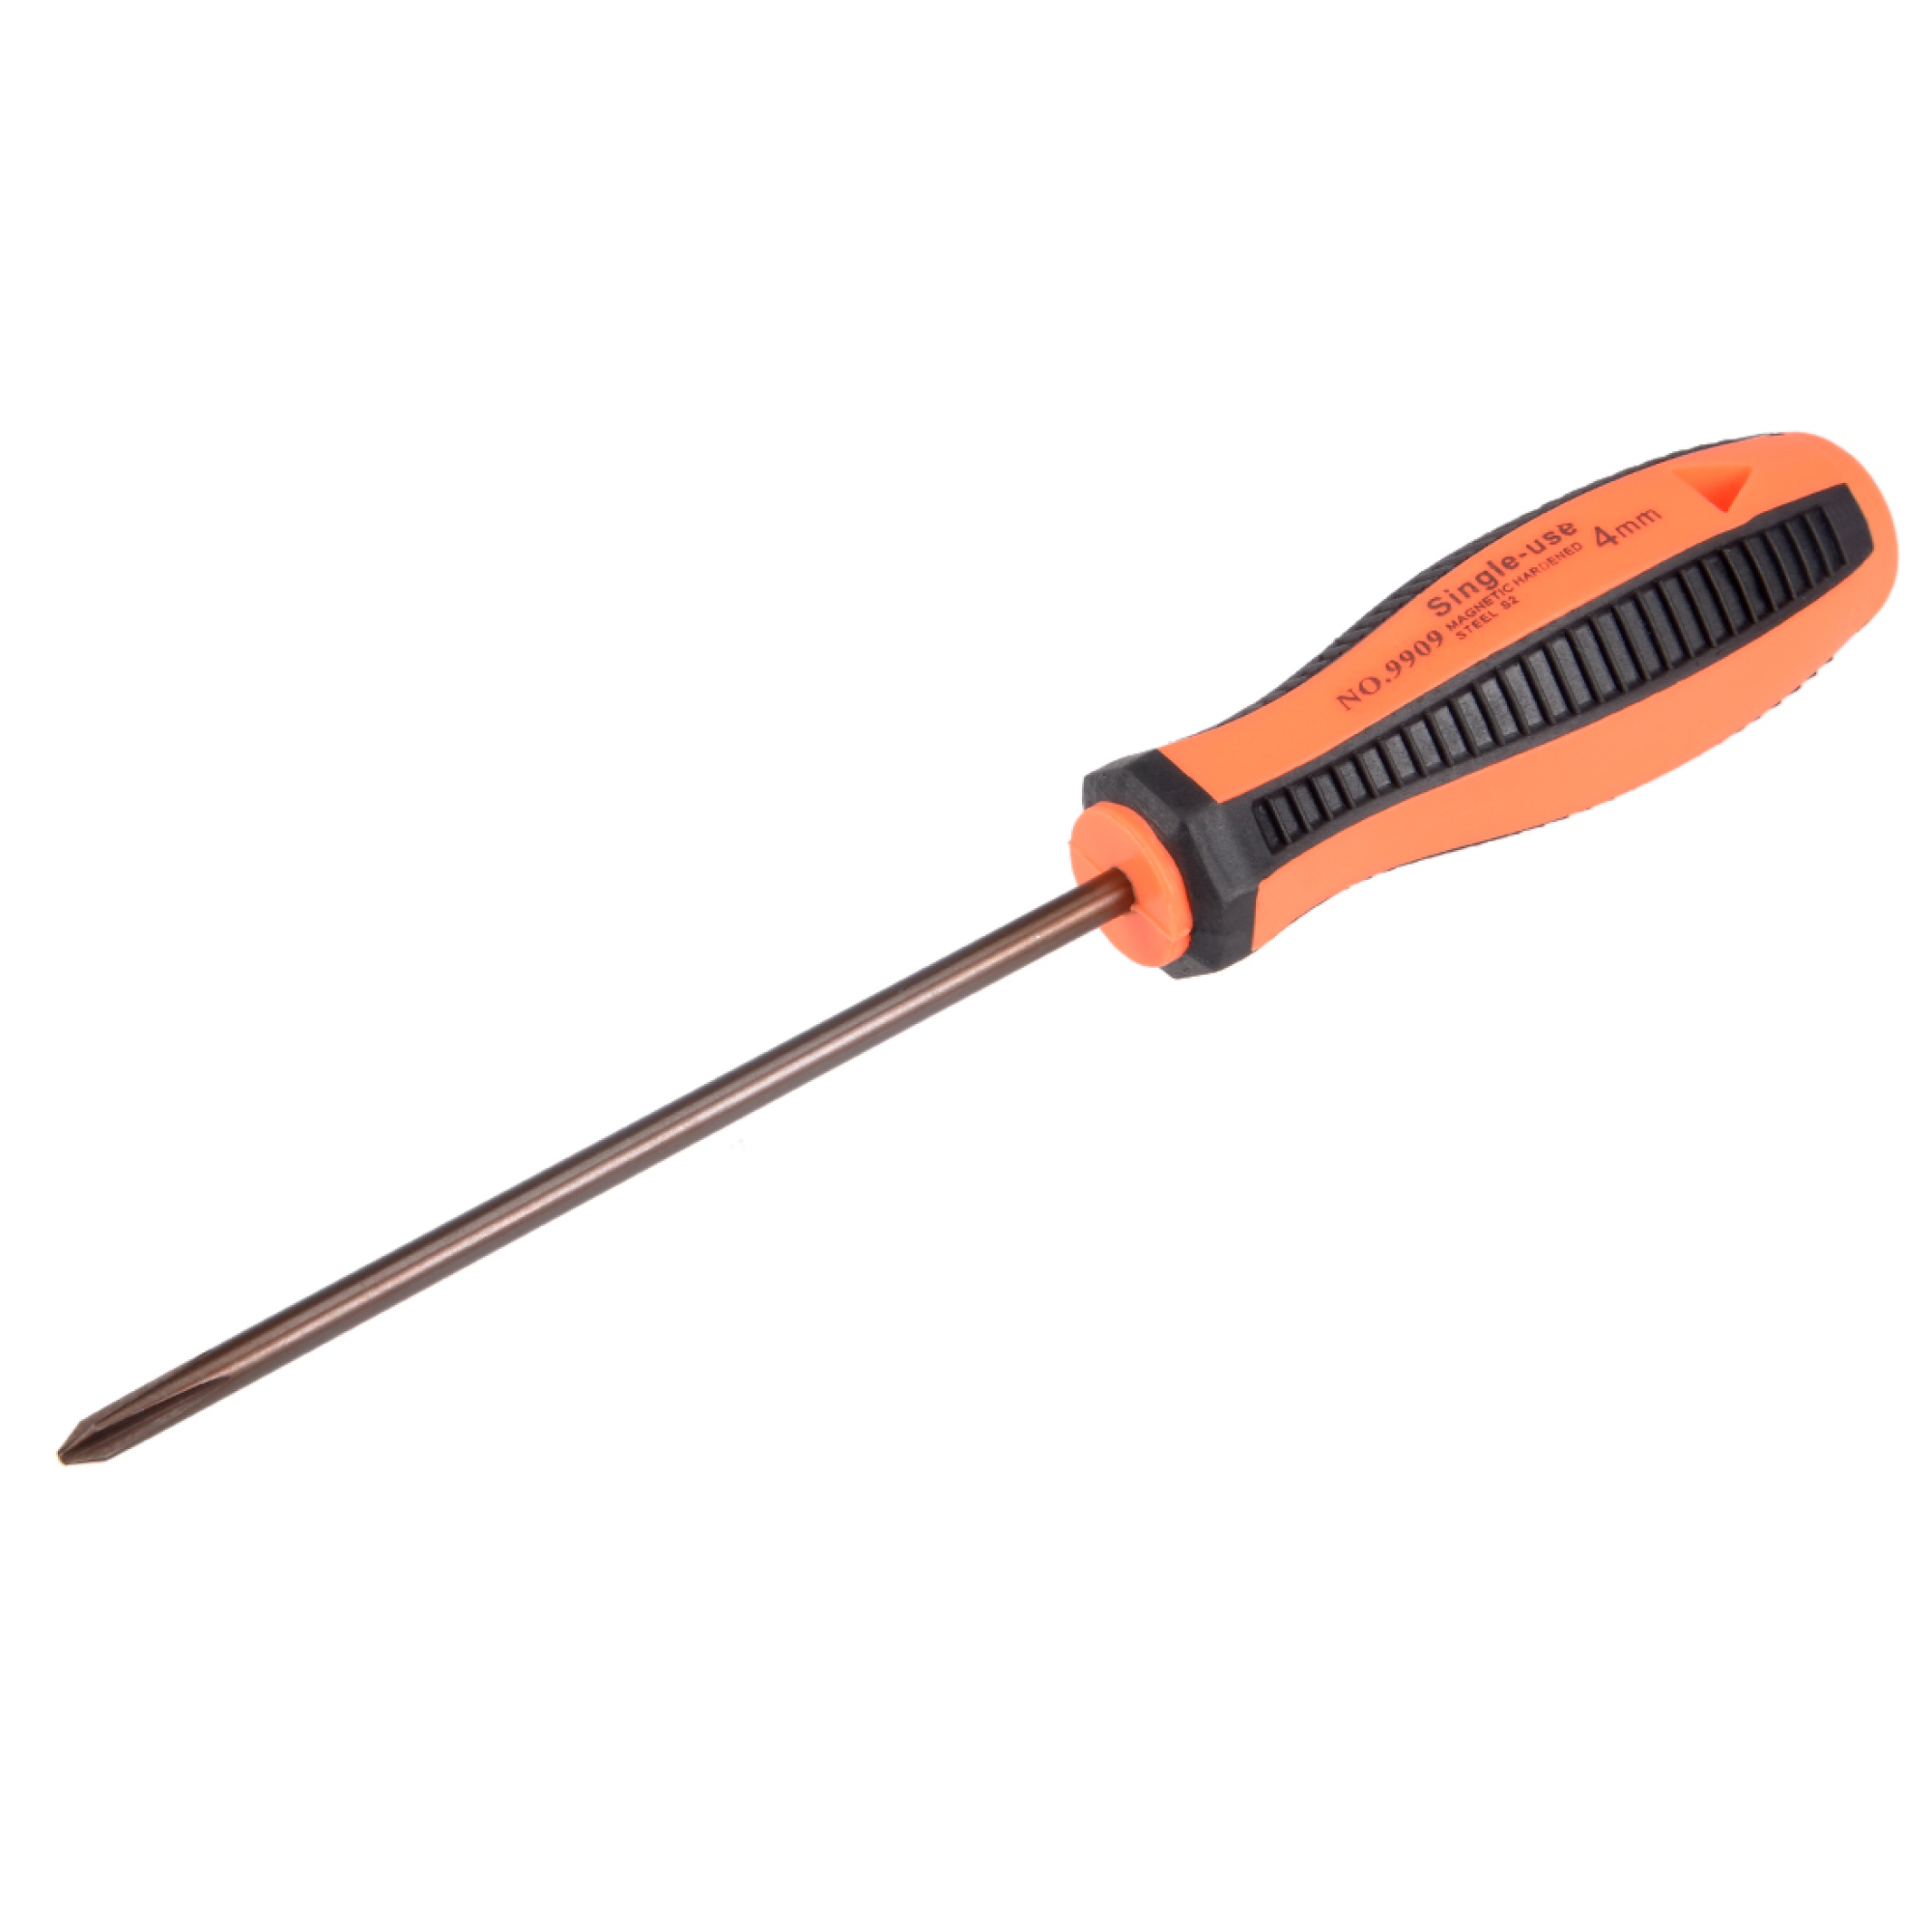 PH0 Phillips Magnetic Screwdriver 4 Inch Round Shaft